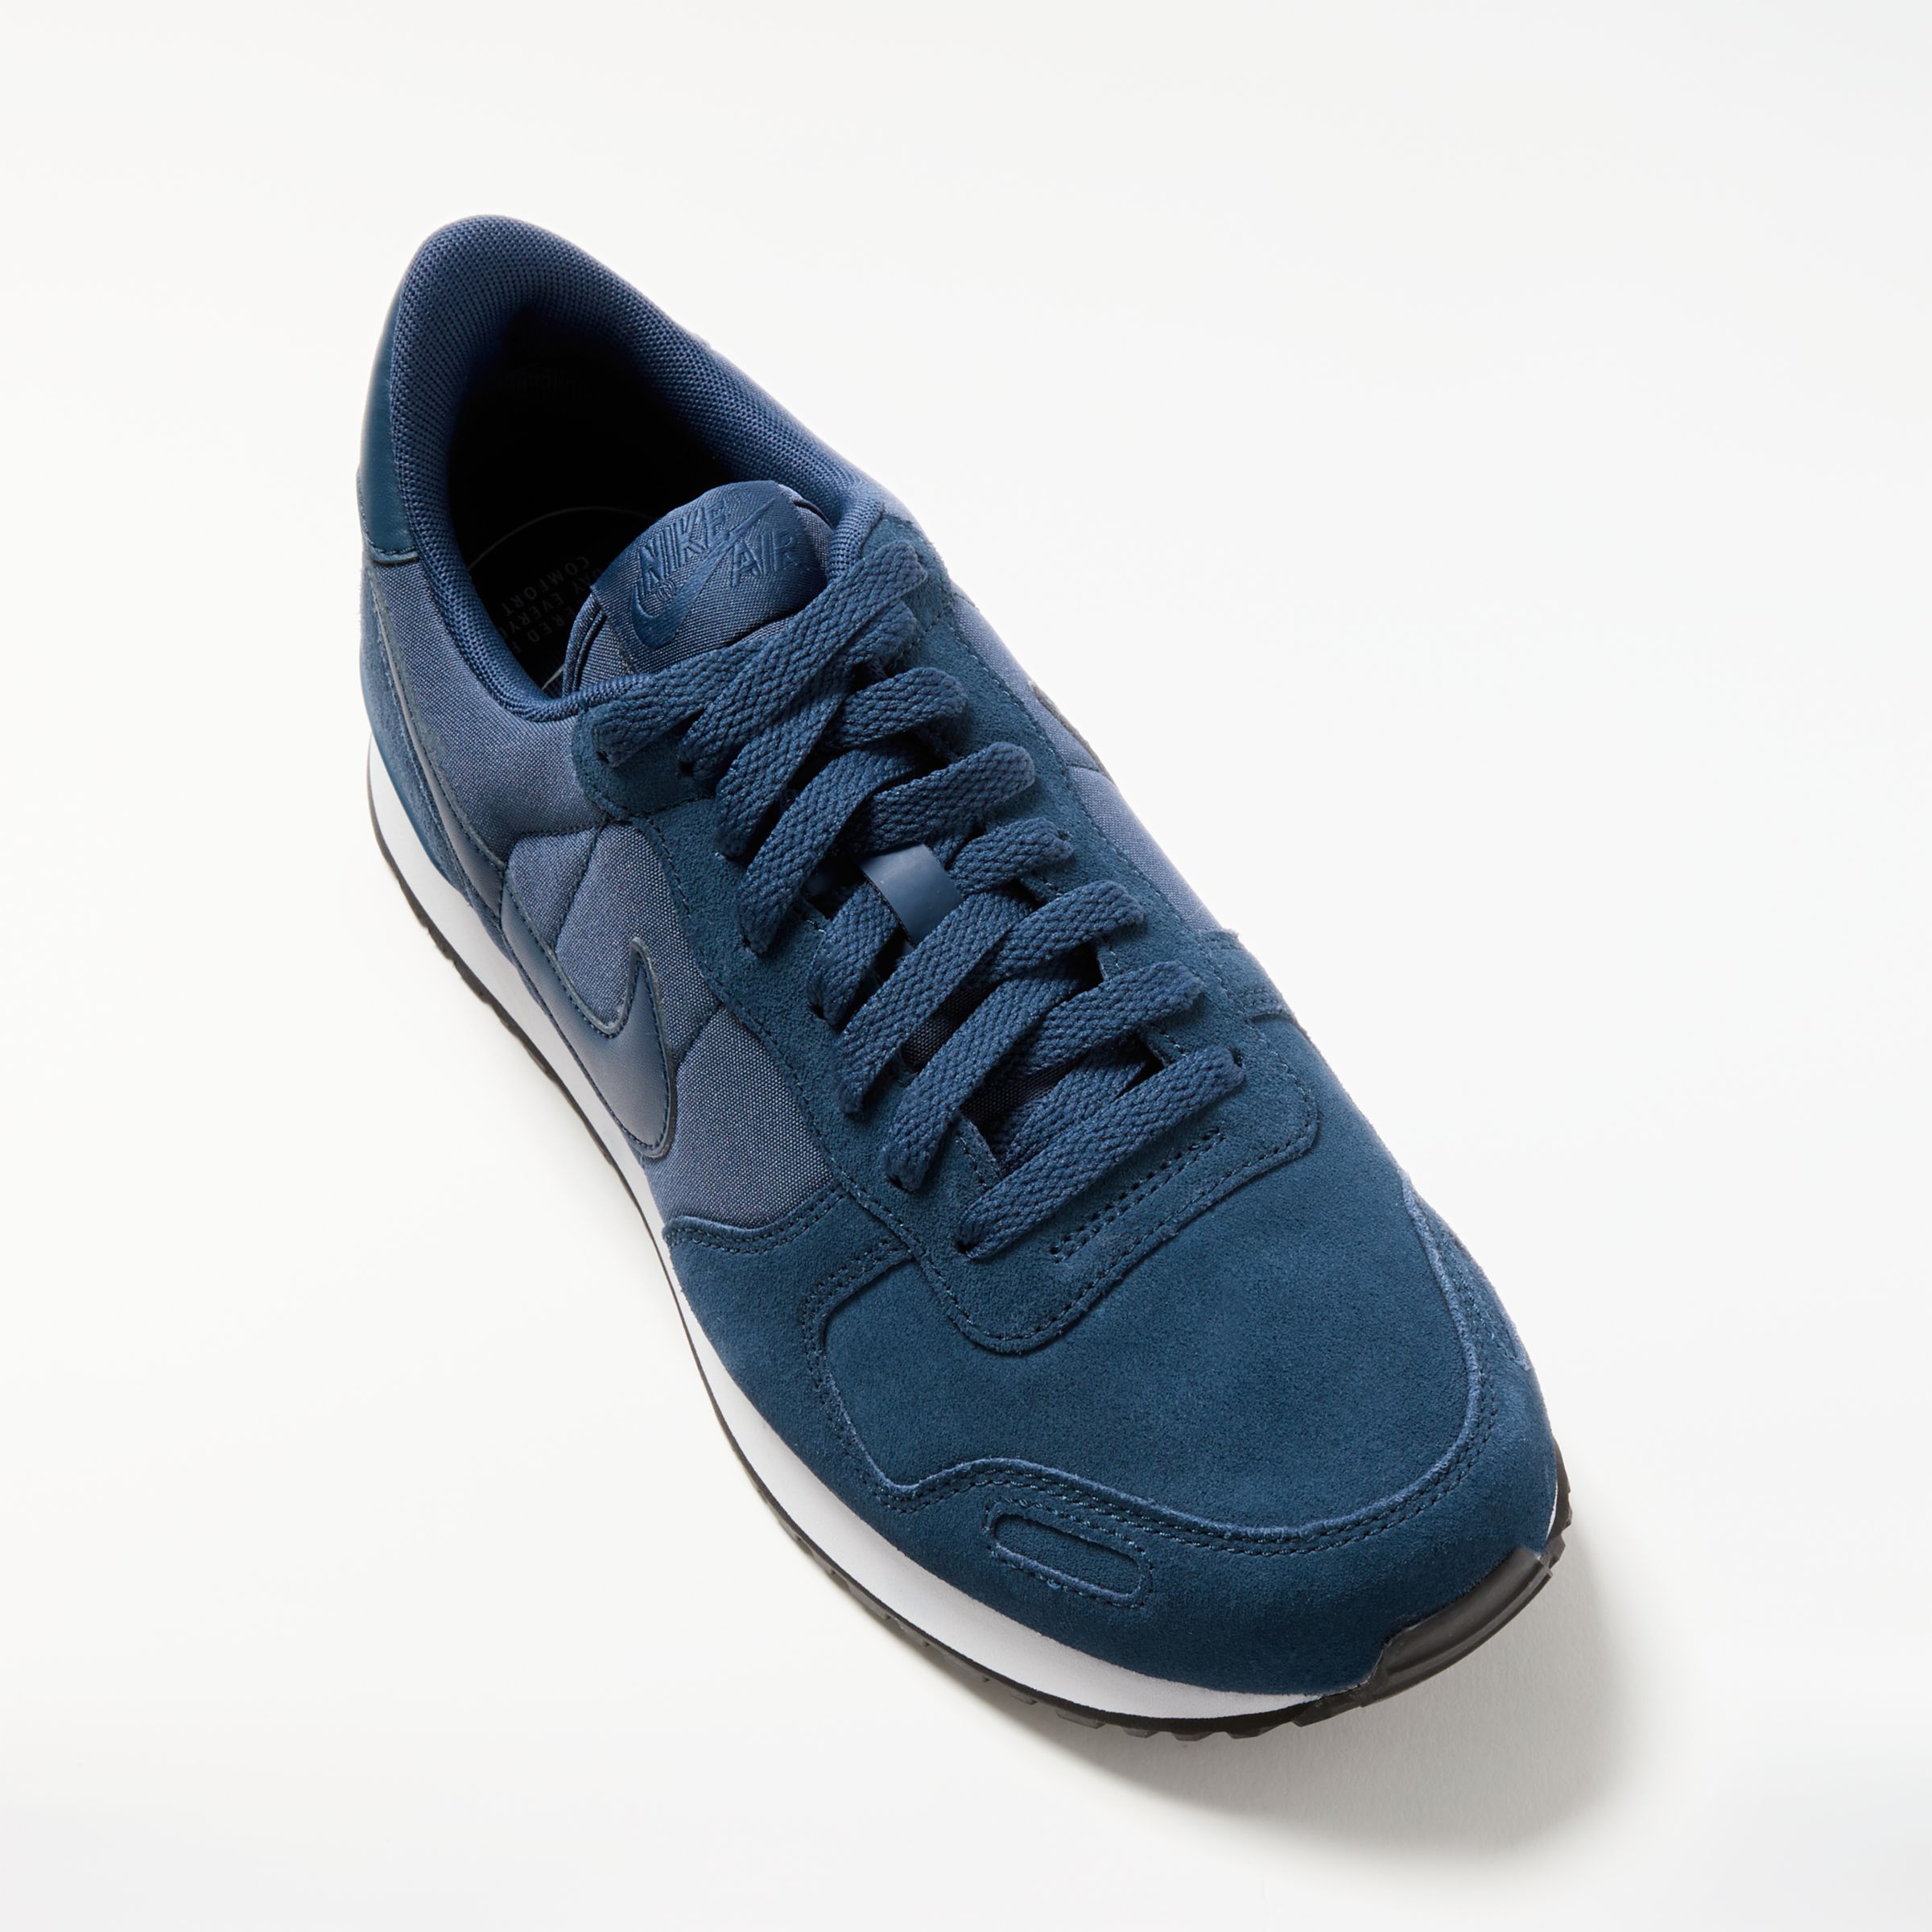 mens nike trainers navy blue